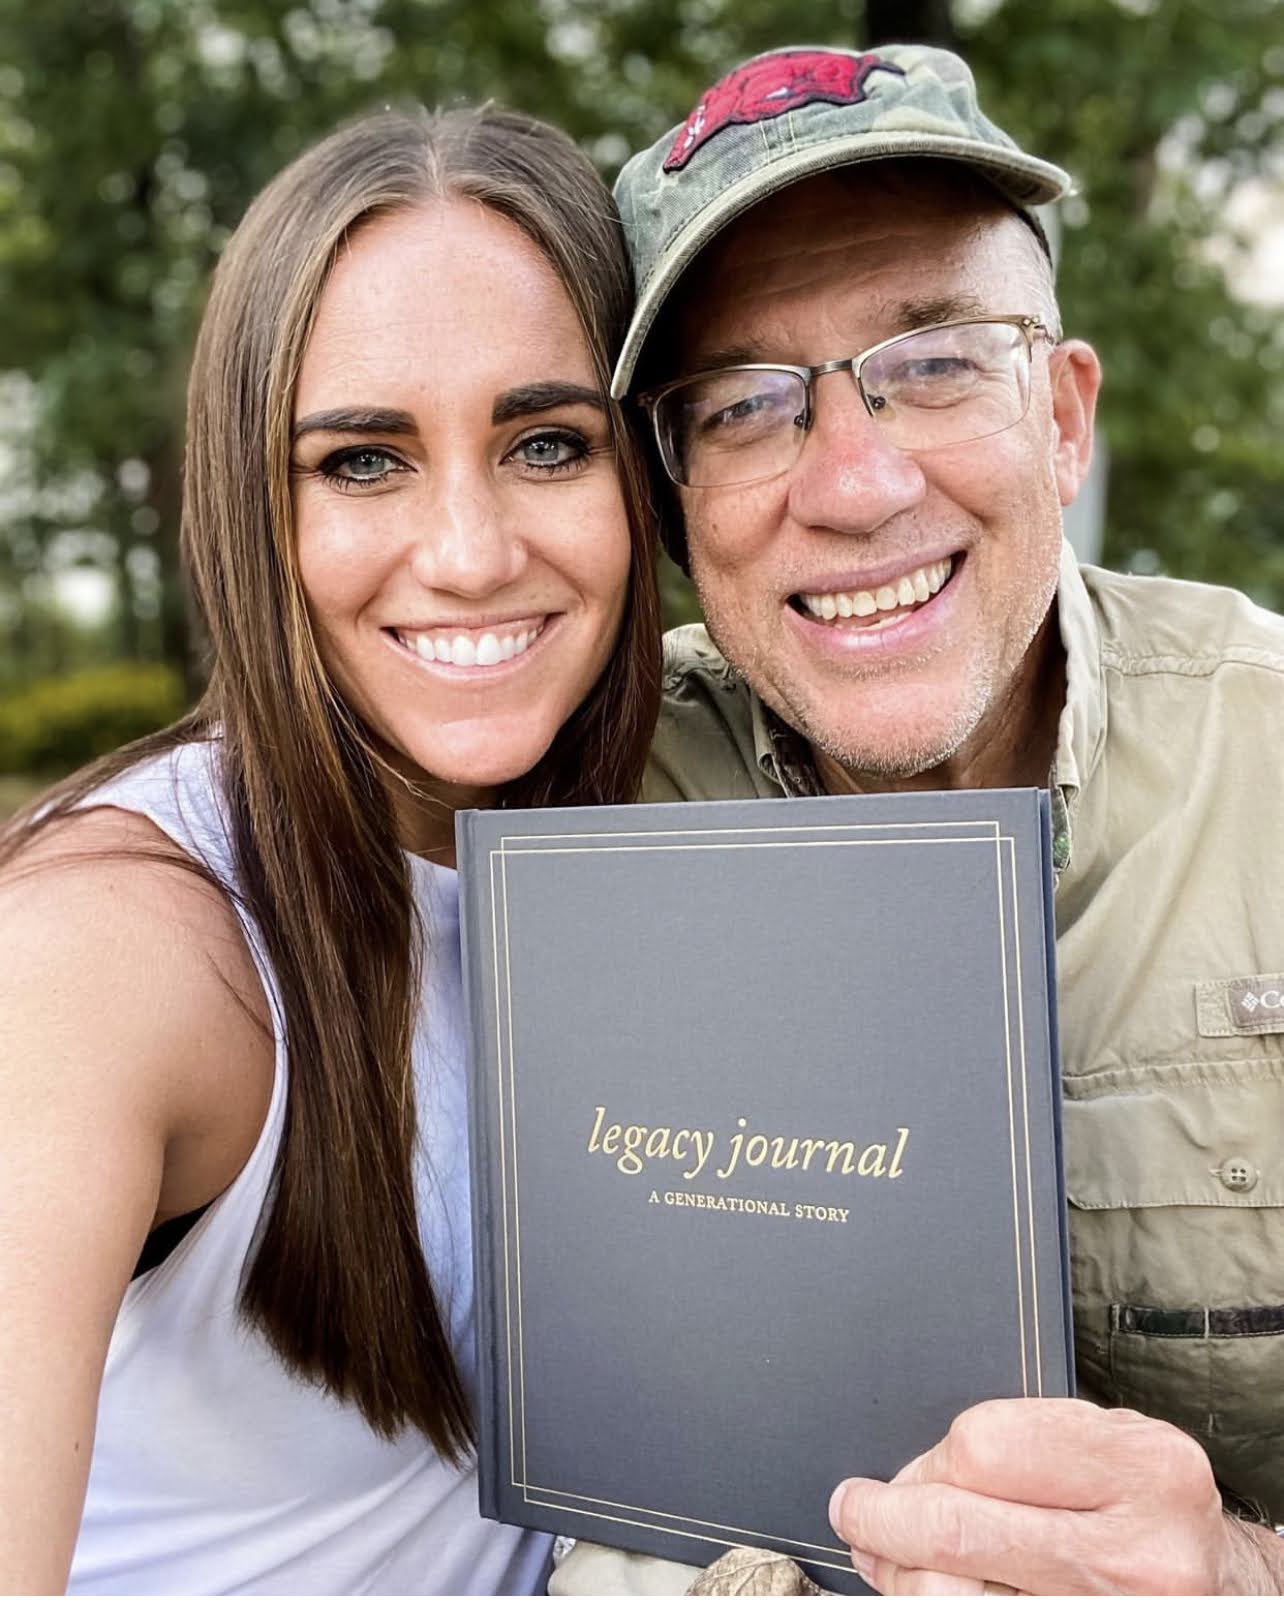 2 people smiling and holding a legacy journal